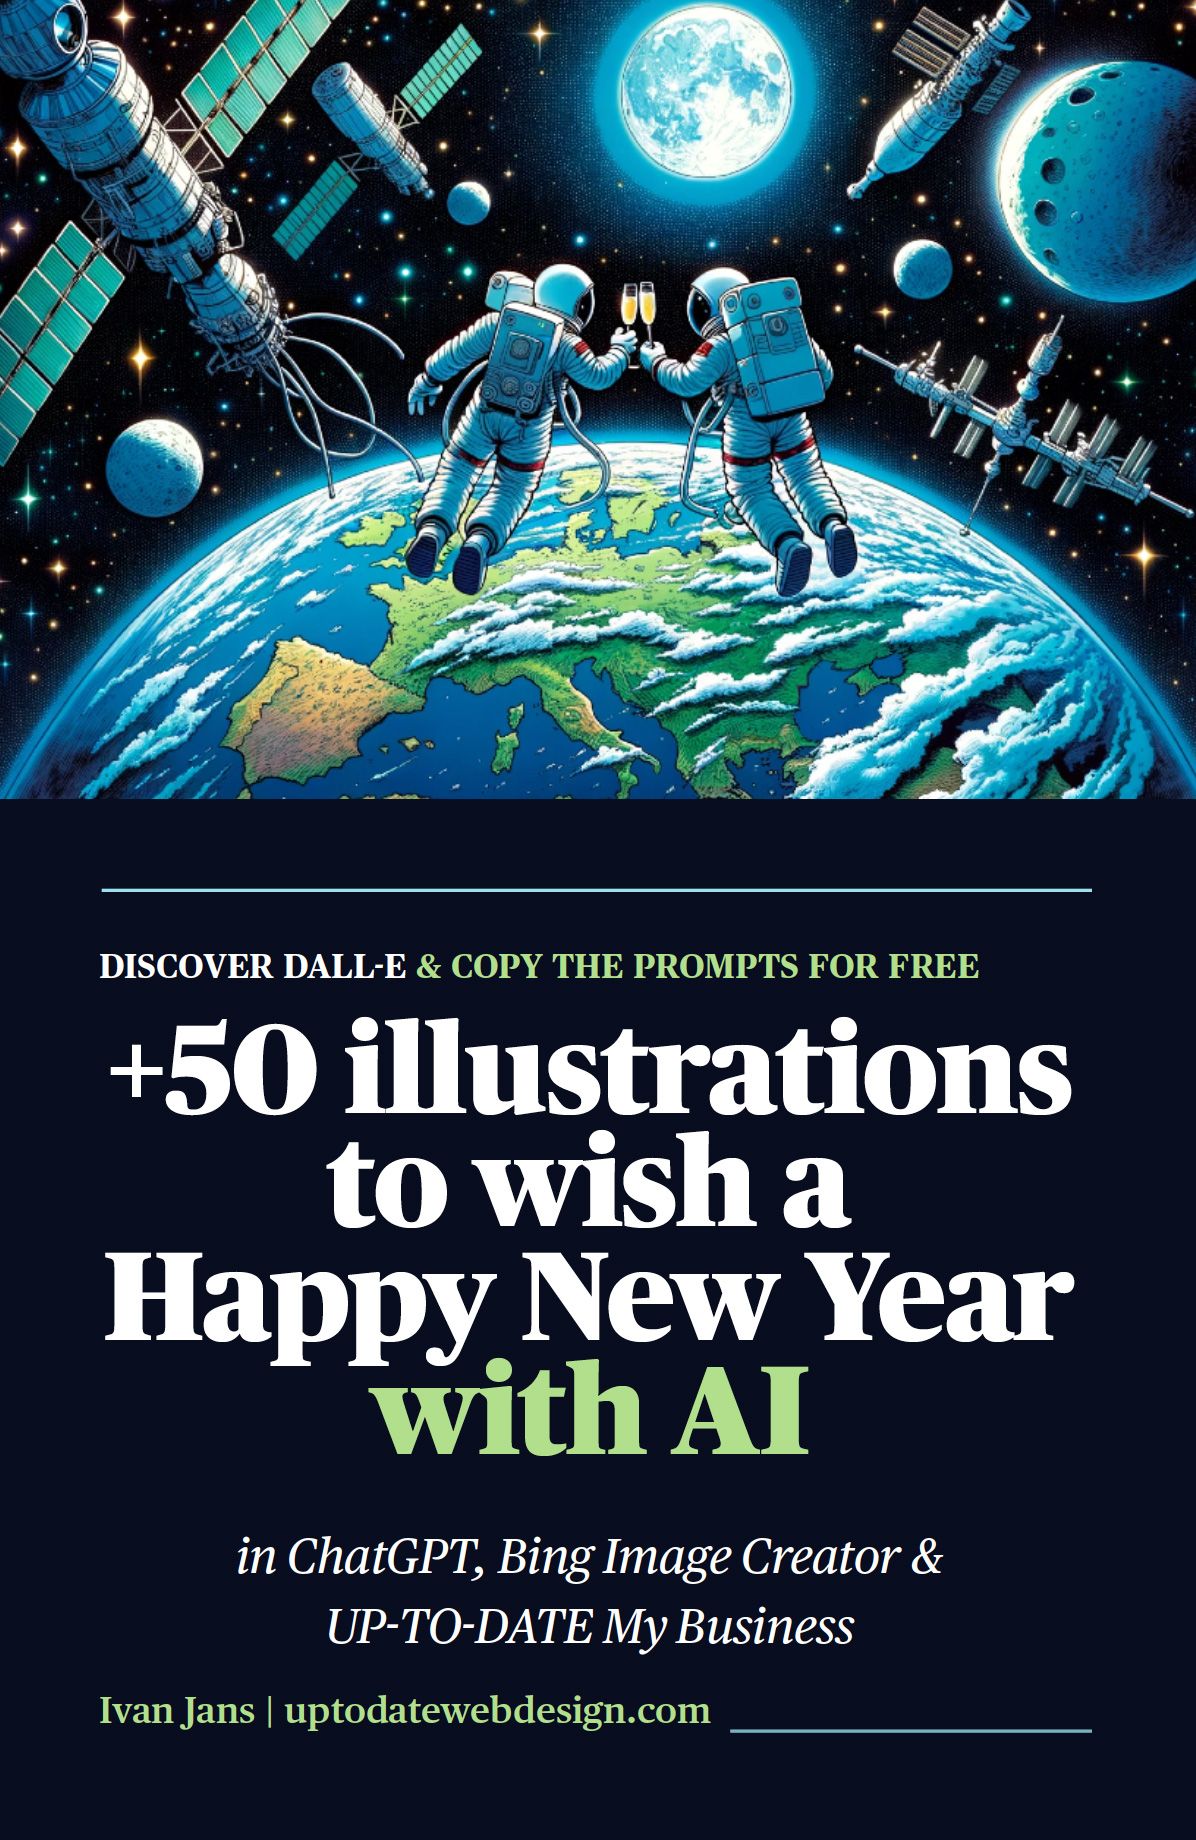 +50 Illustrations to wish a Happy New Year with AI